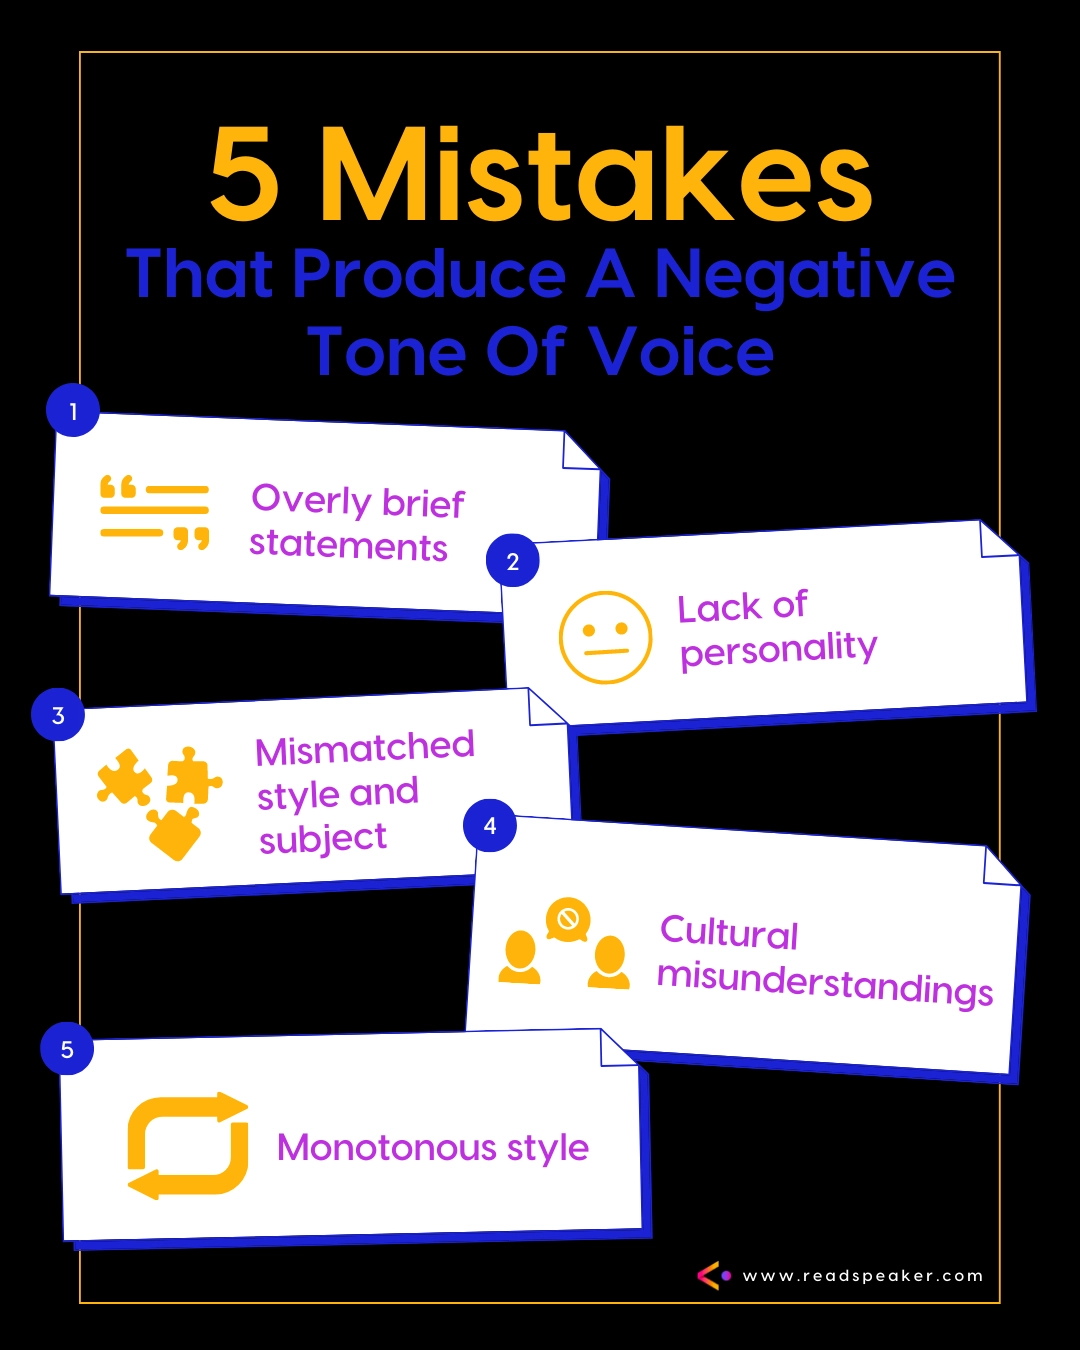 5 mistakes that produce a negative tone of voice